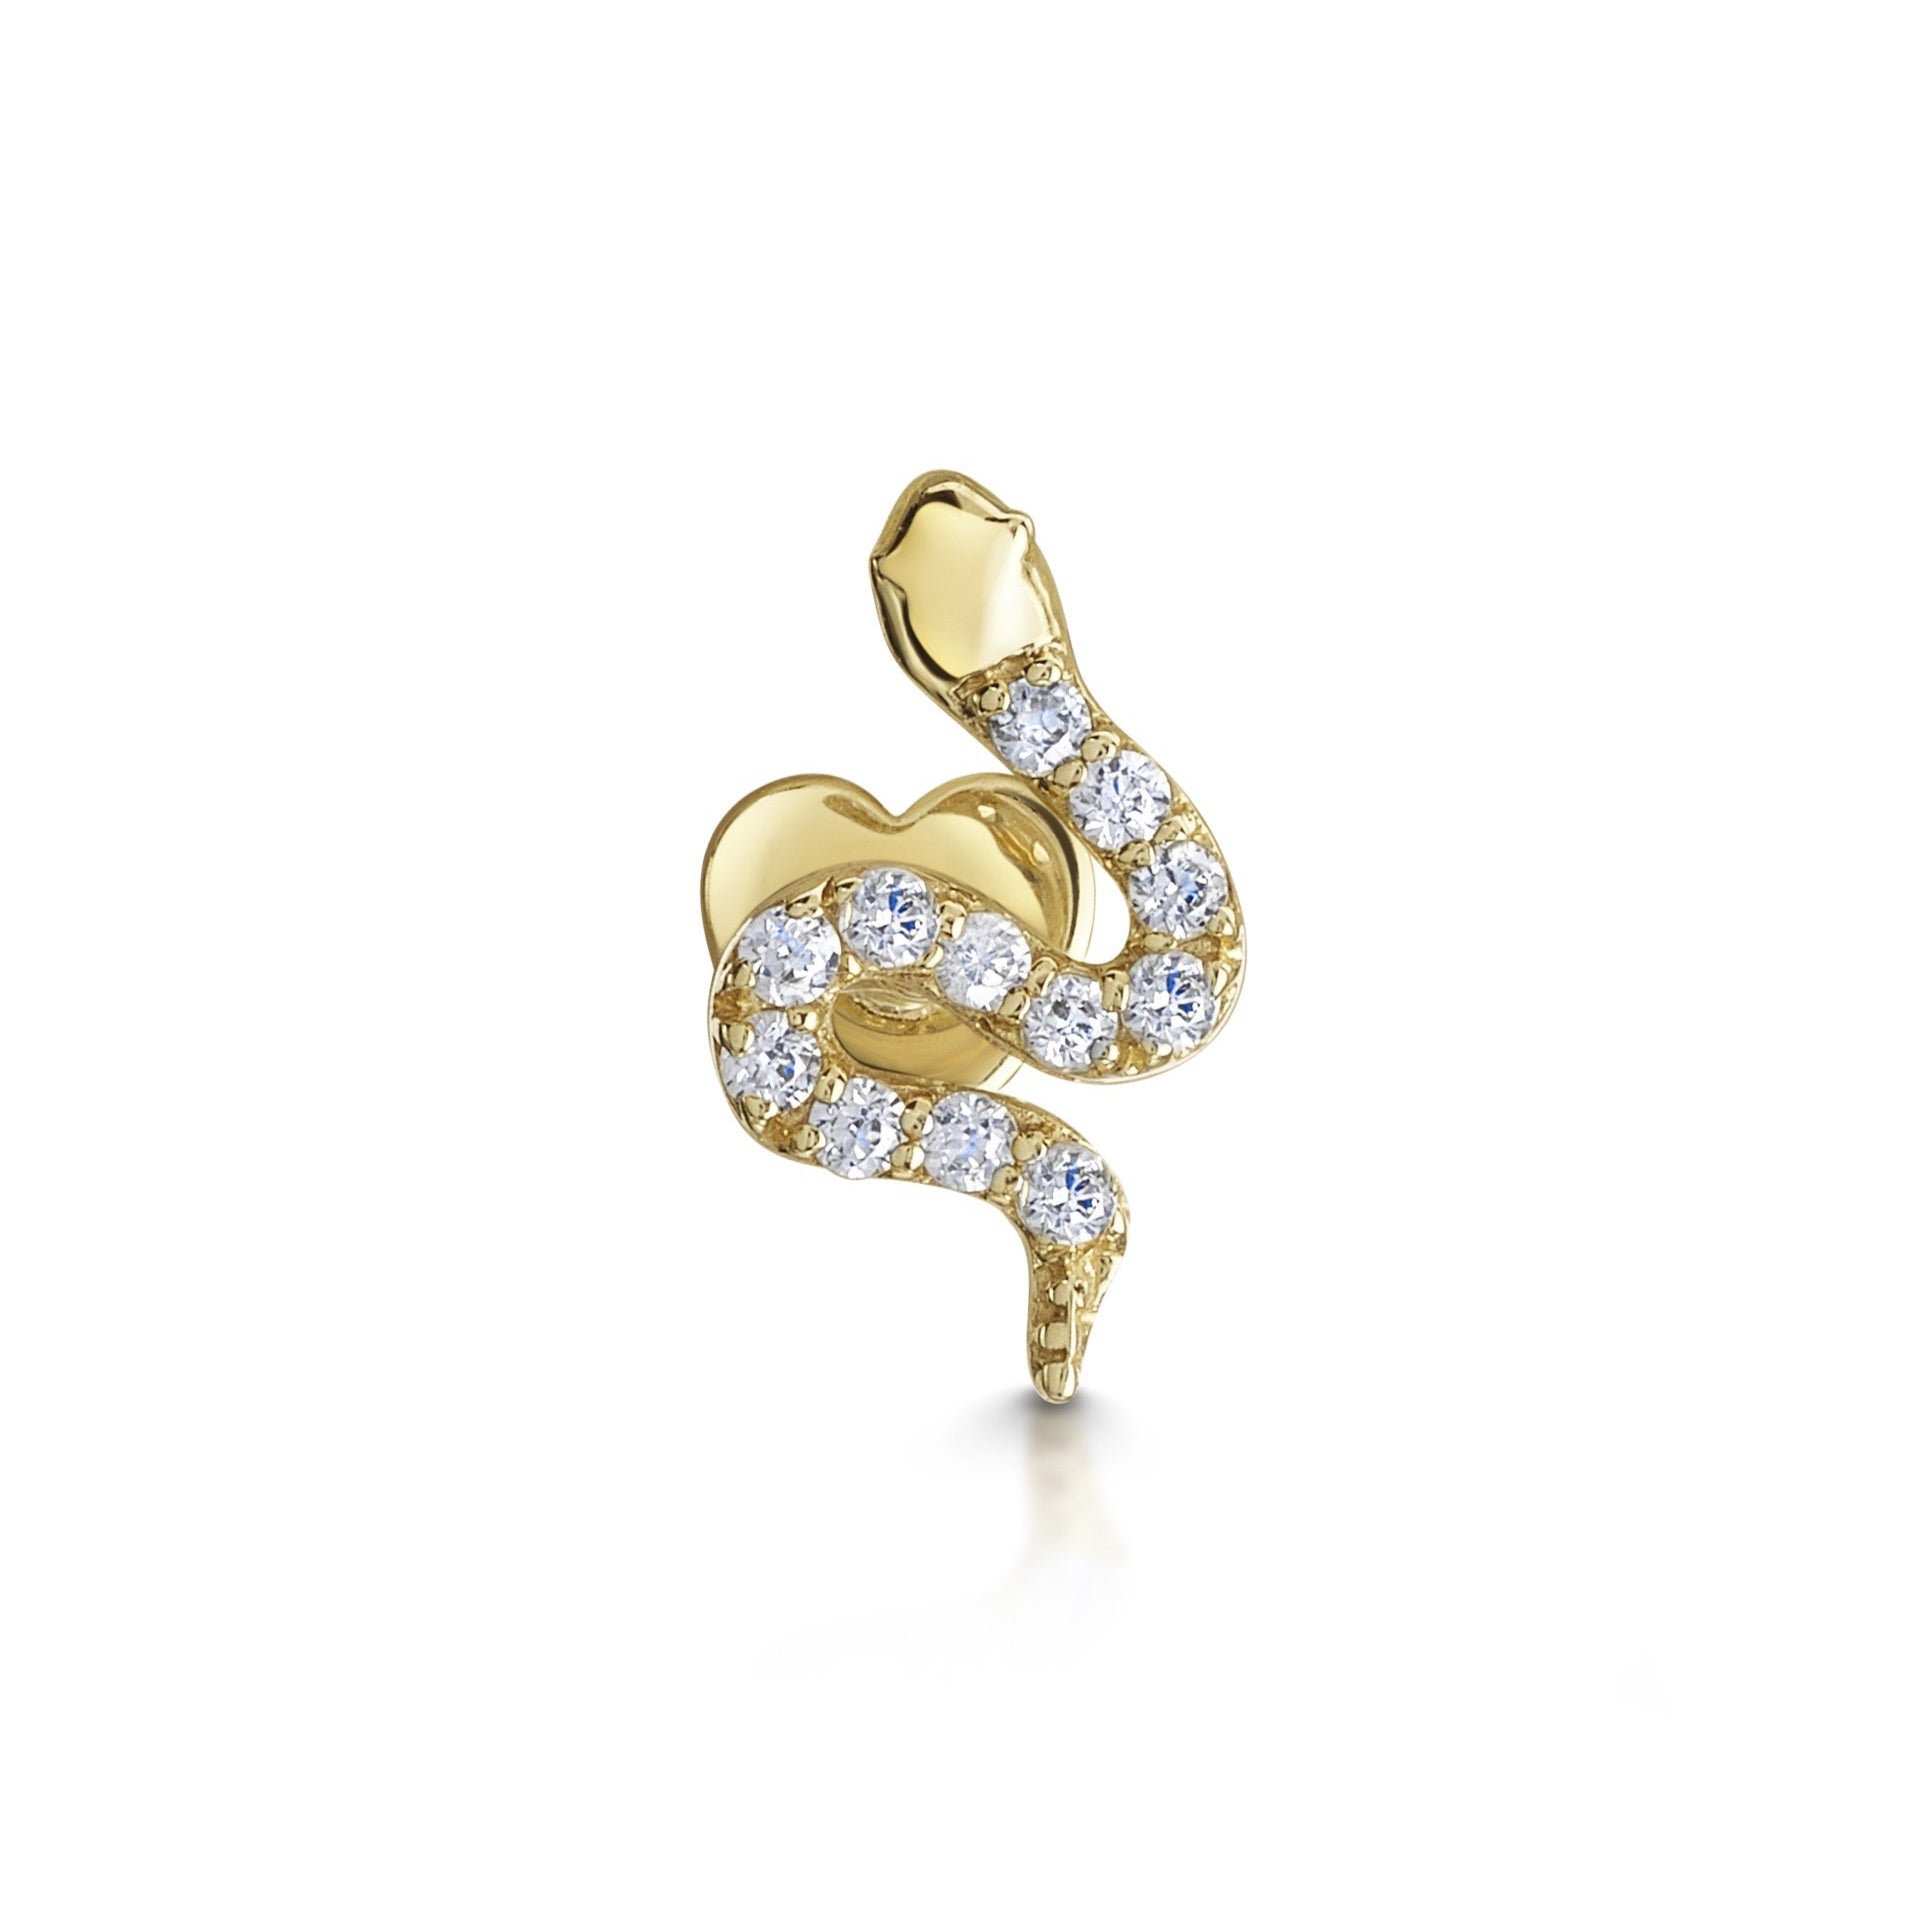 14k solid yellow gold sparkly snake flat back labret stud earring 8mm - LAURA BOND jewellery